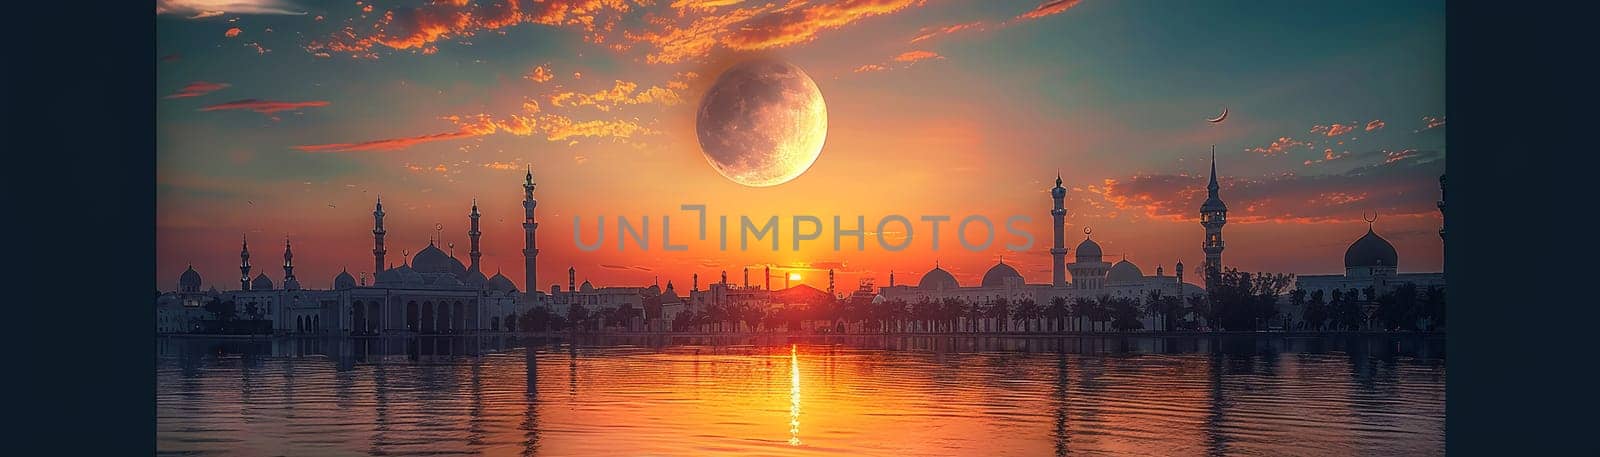 Islamic Crescent Moon Rising Over a Quiet Mosque, The celestial symbol blends into the twilight, marking the significance of time and worship.